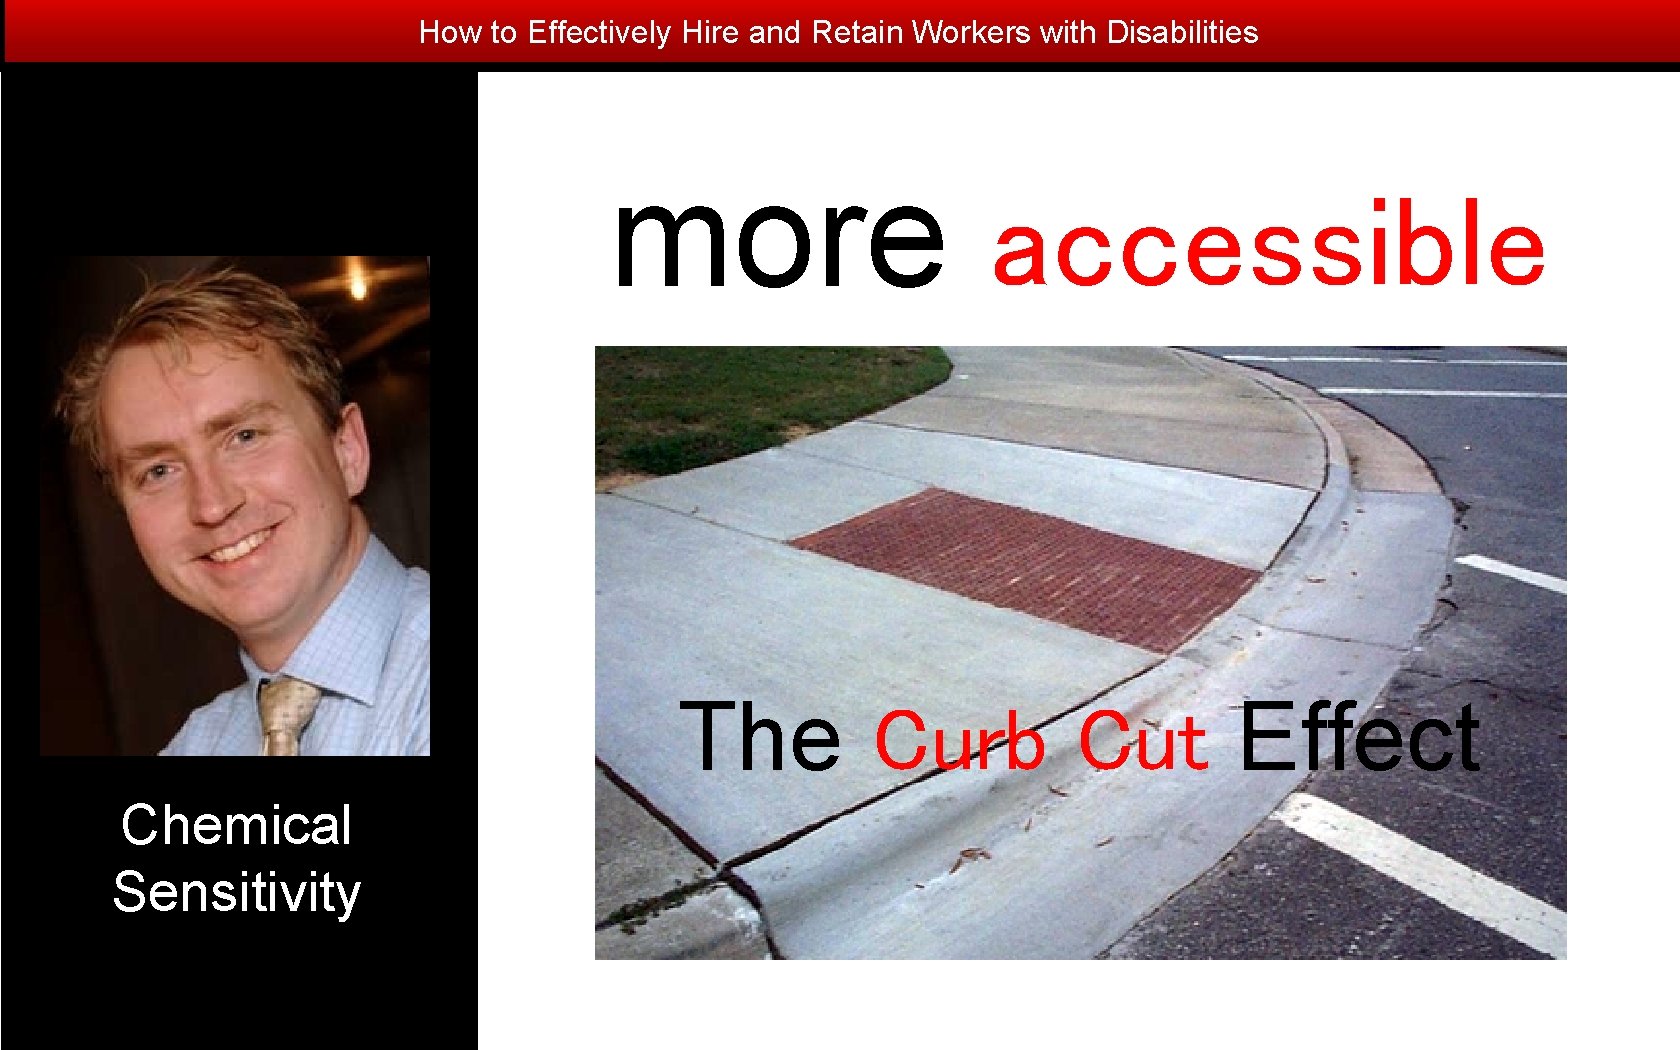 How to Effectively Hire and Retain Workers with Disabilities more accessible The Curb Cut